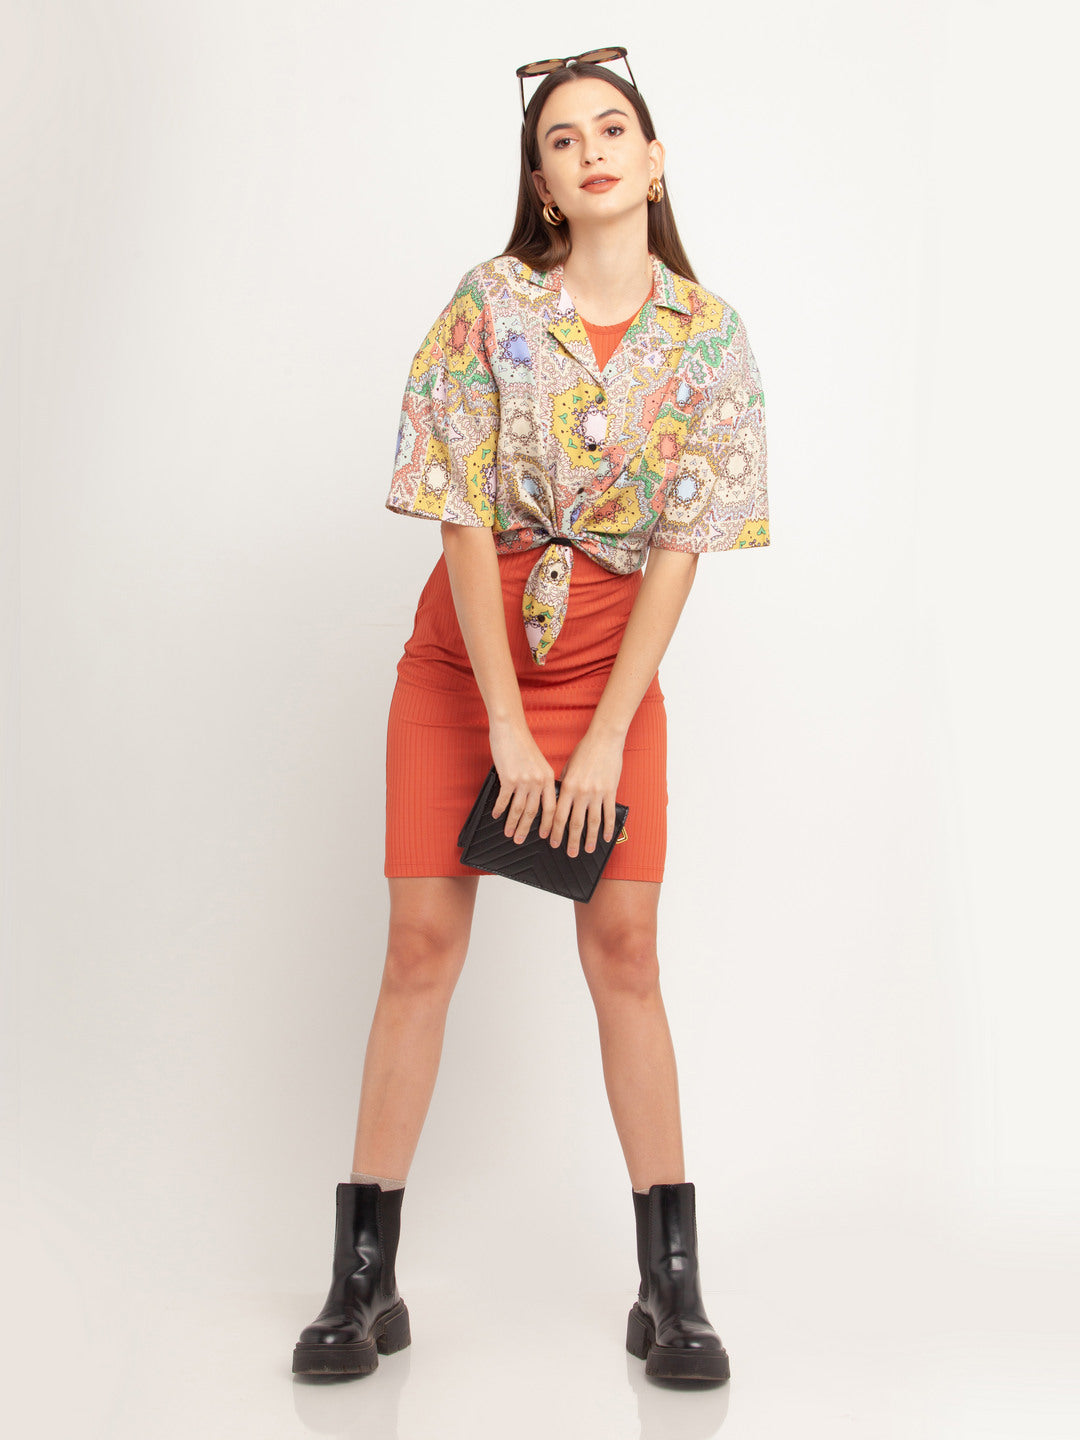 Multicolored Printed Shirt For Women